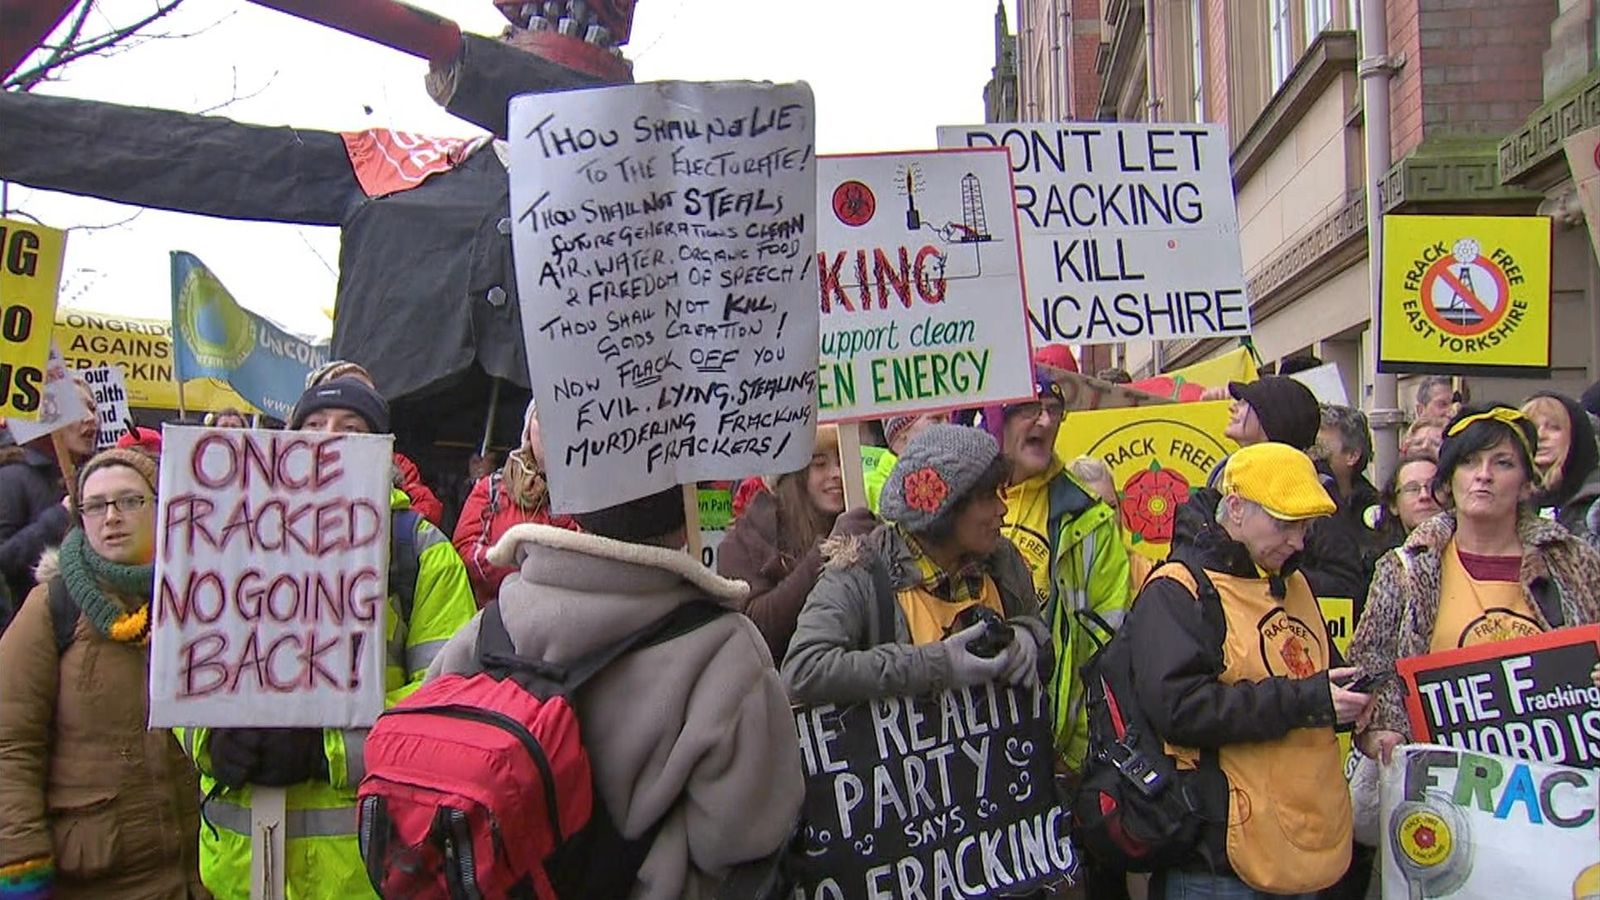 Labour pledges to ban fracking 'once and for all' with opposition day motion